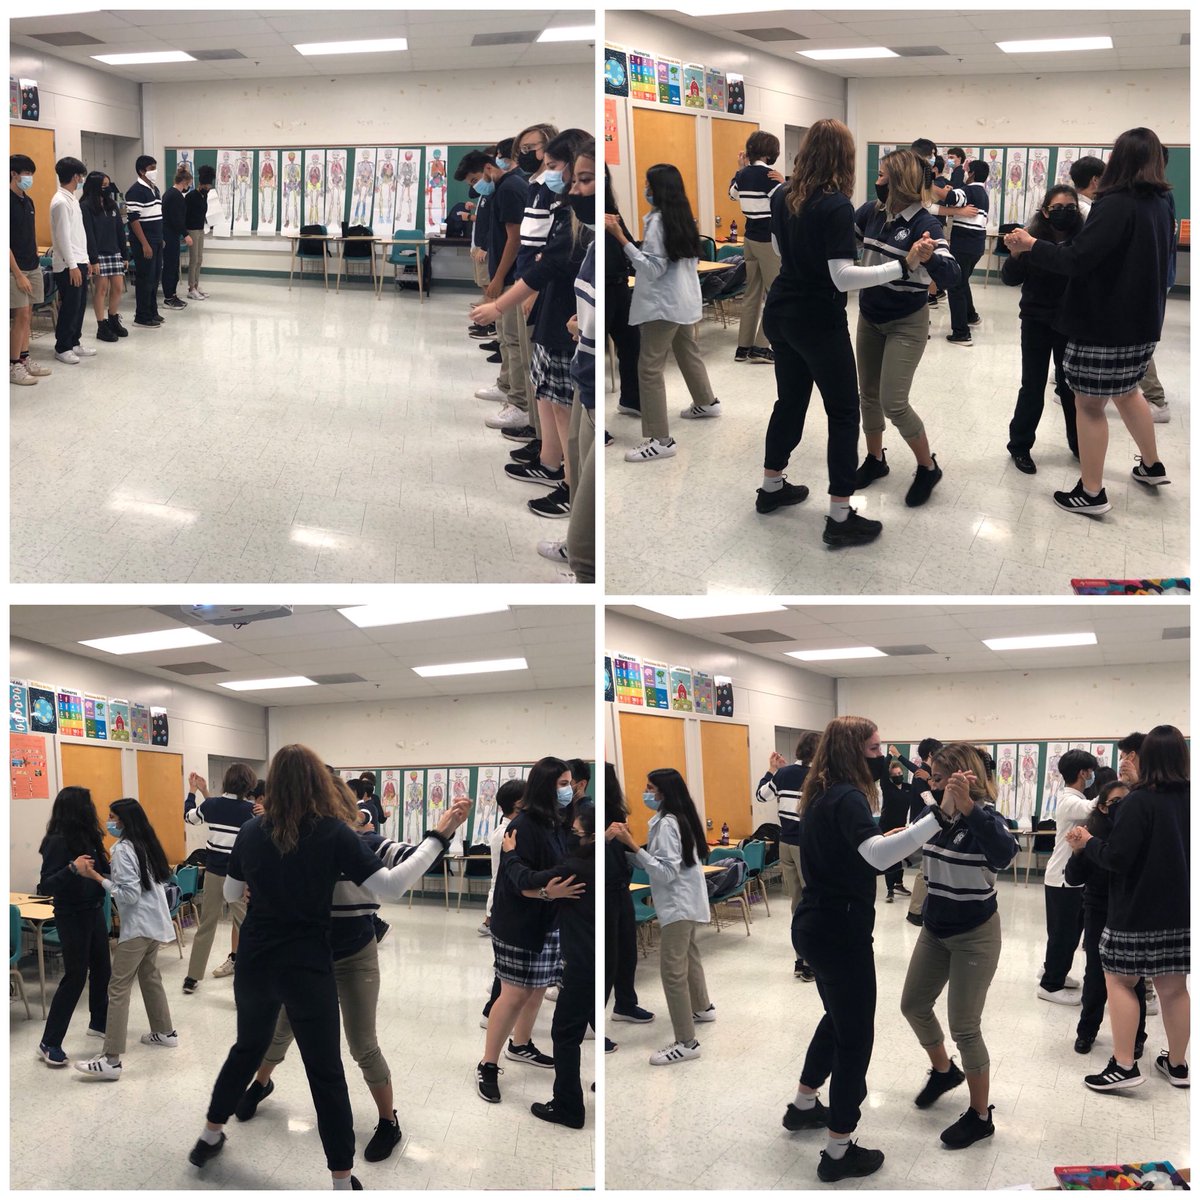 Thank you Mr. Granillo and the students from your Senior Spanish class for demonstrating one of the traditional Waltzes performed at a Quinceañera.